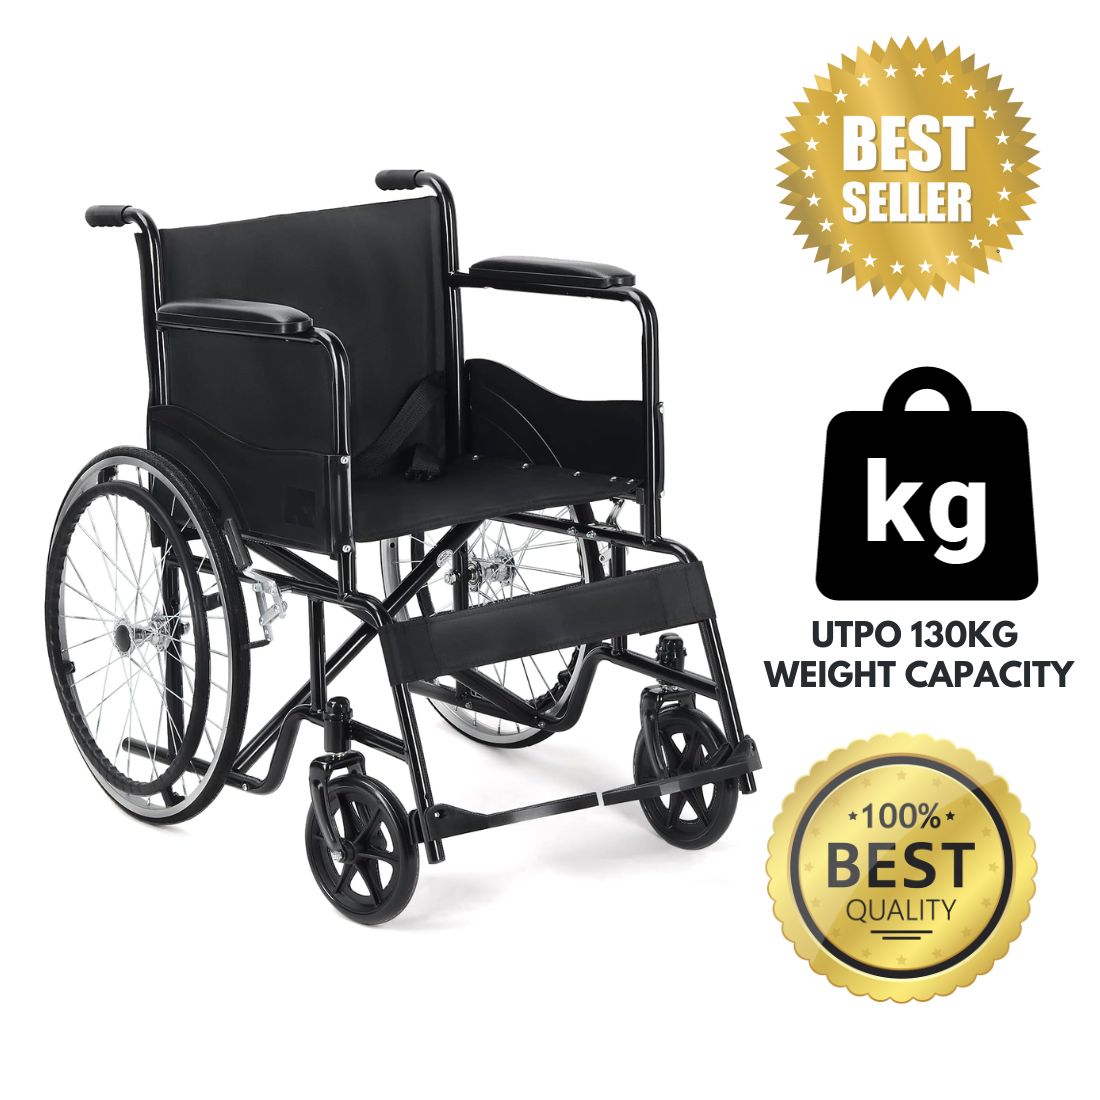 Foldable Lightweight Wheelchair - Same Day Delivery across Chennai*